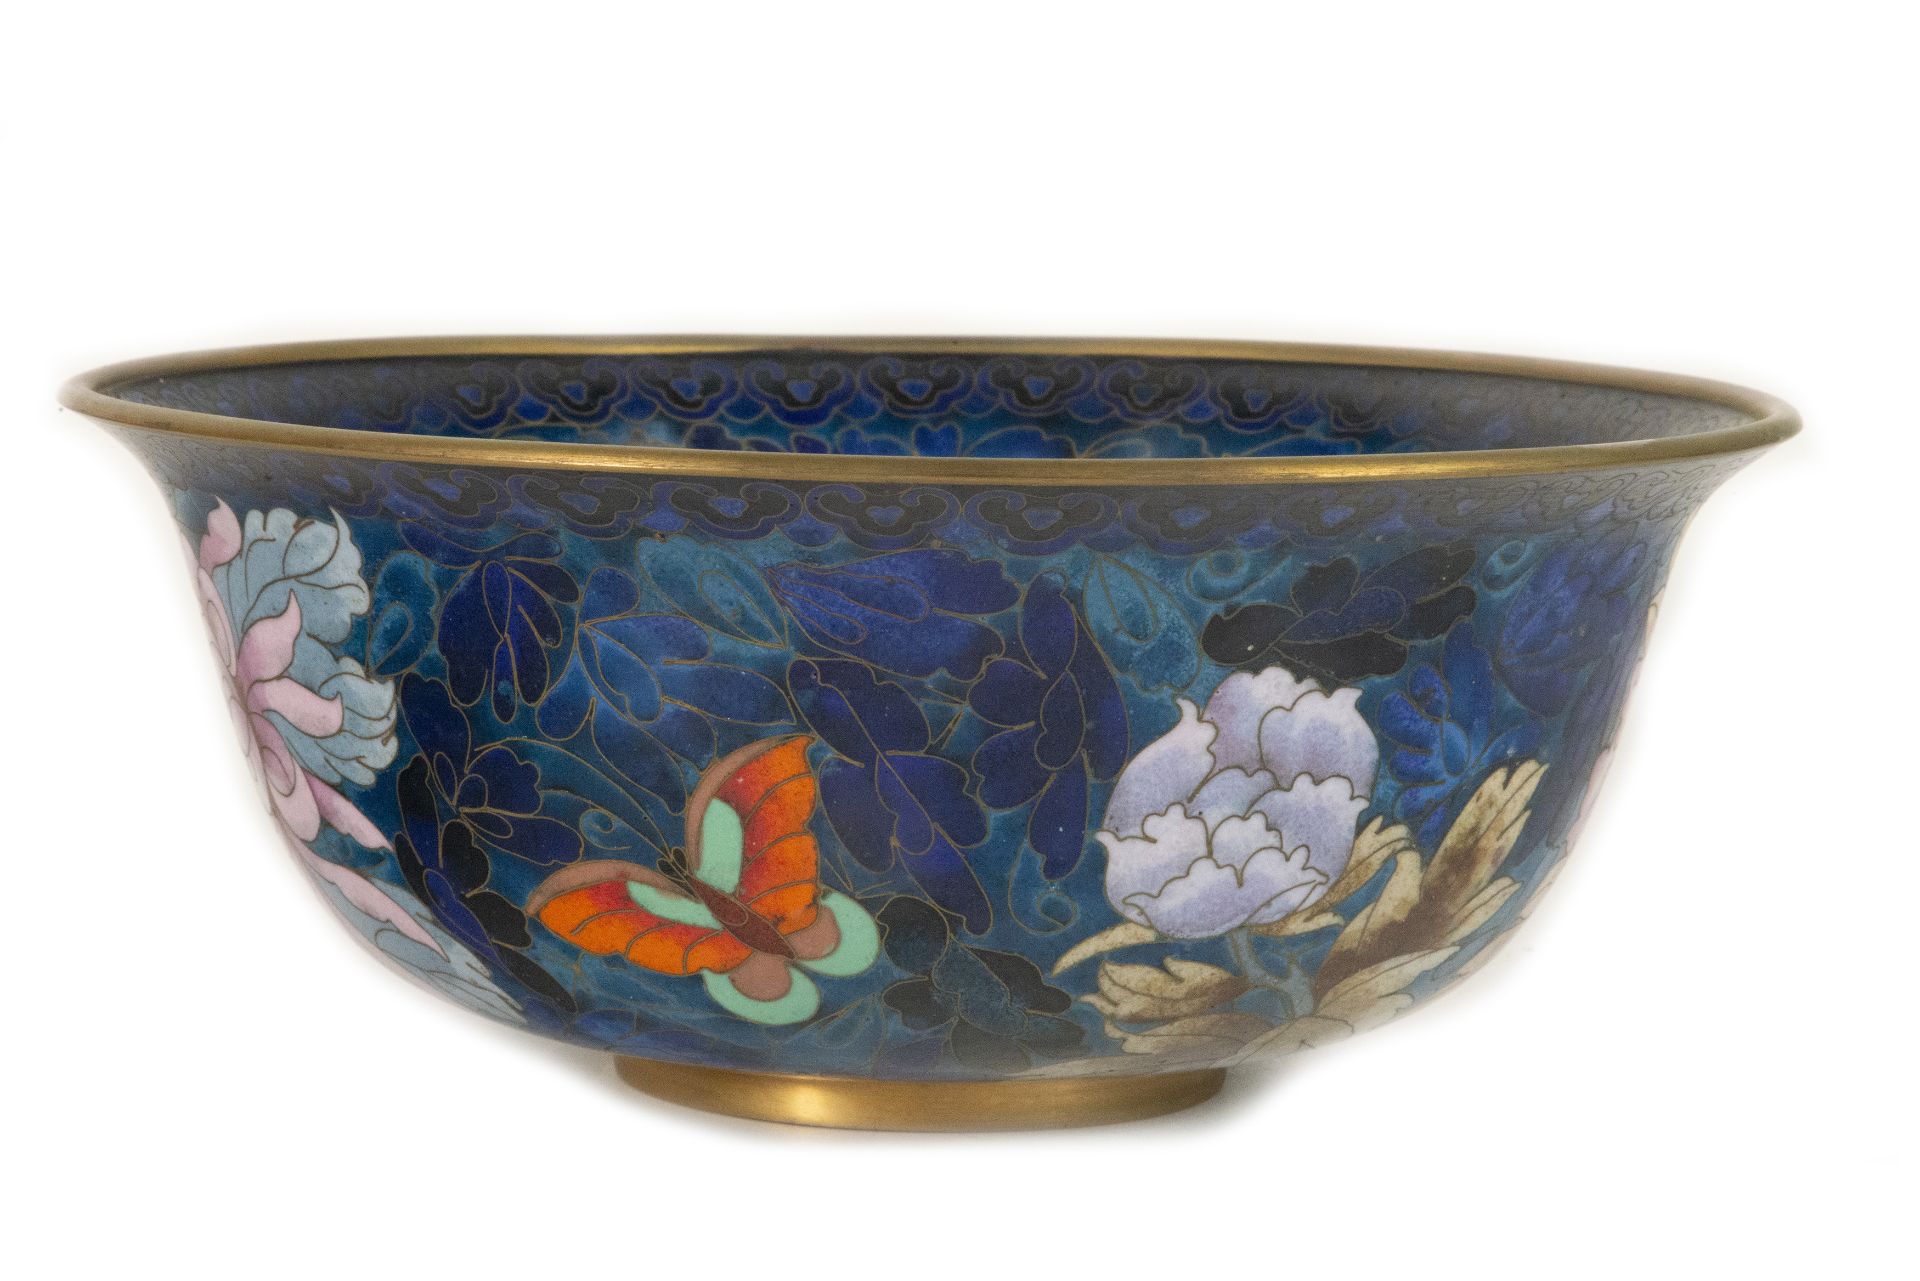 Chinese cloisonne bowl, 20th century - Image 2 of 4